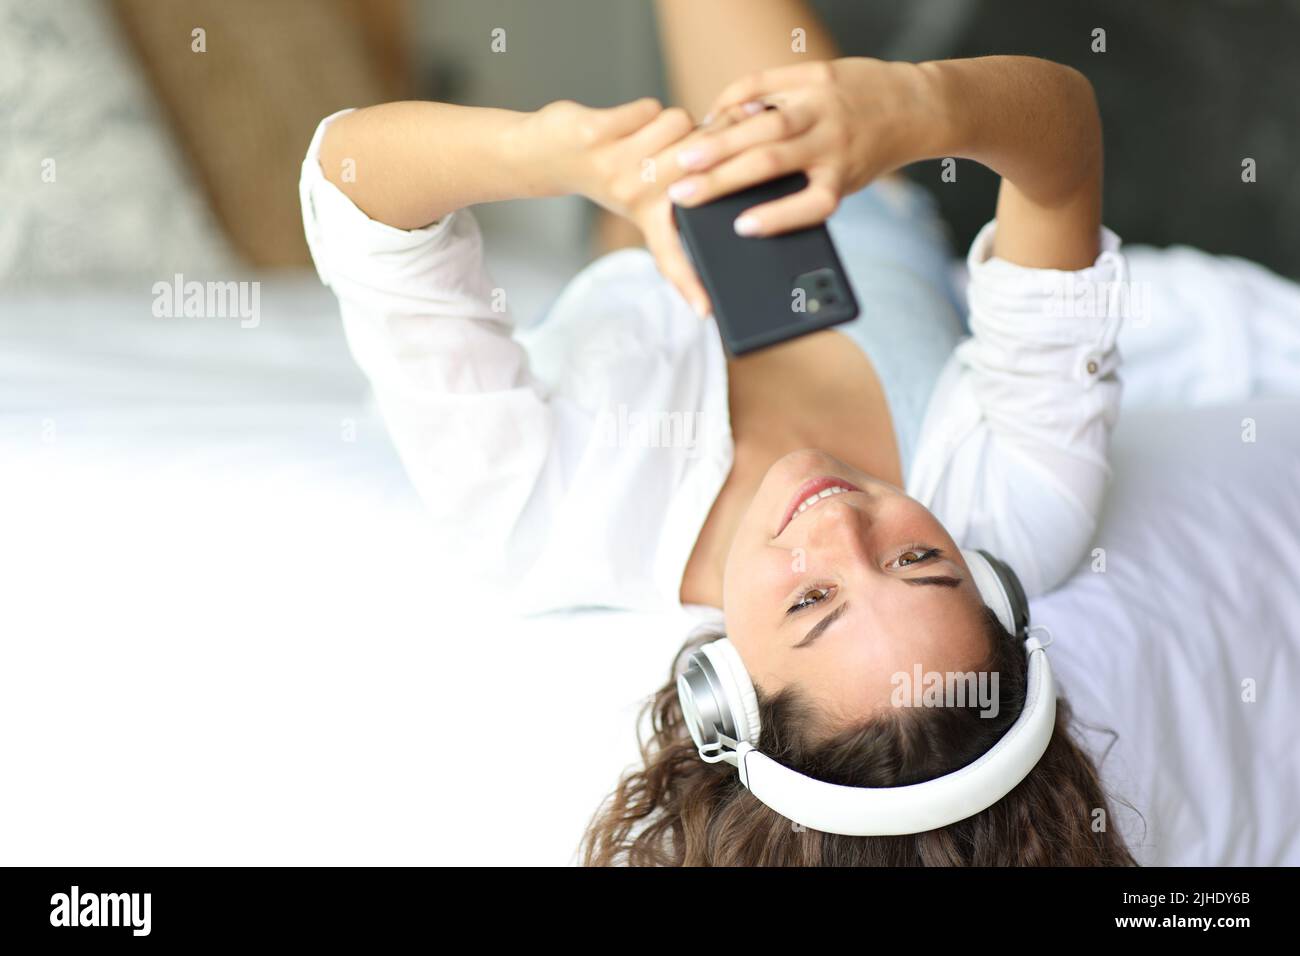 Happy woman listening to music wearing headphones on a bed Stock Photo